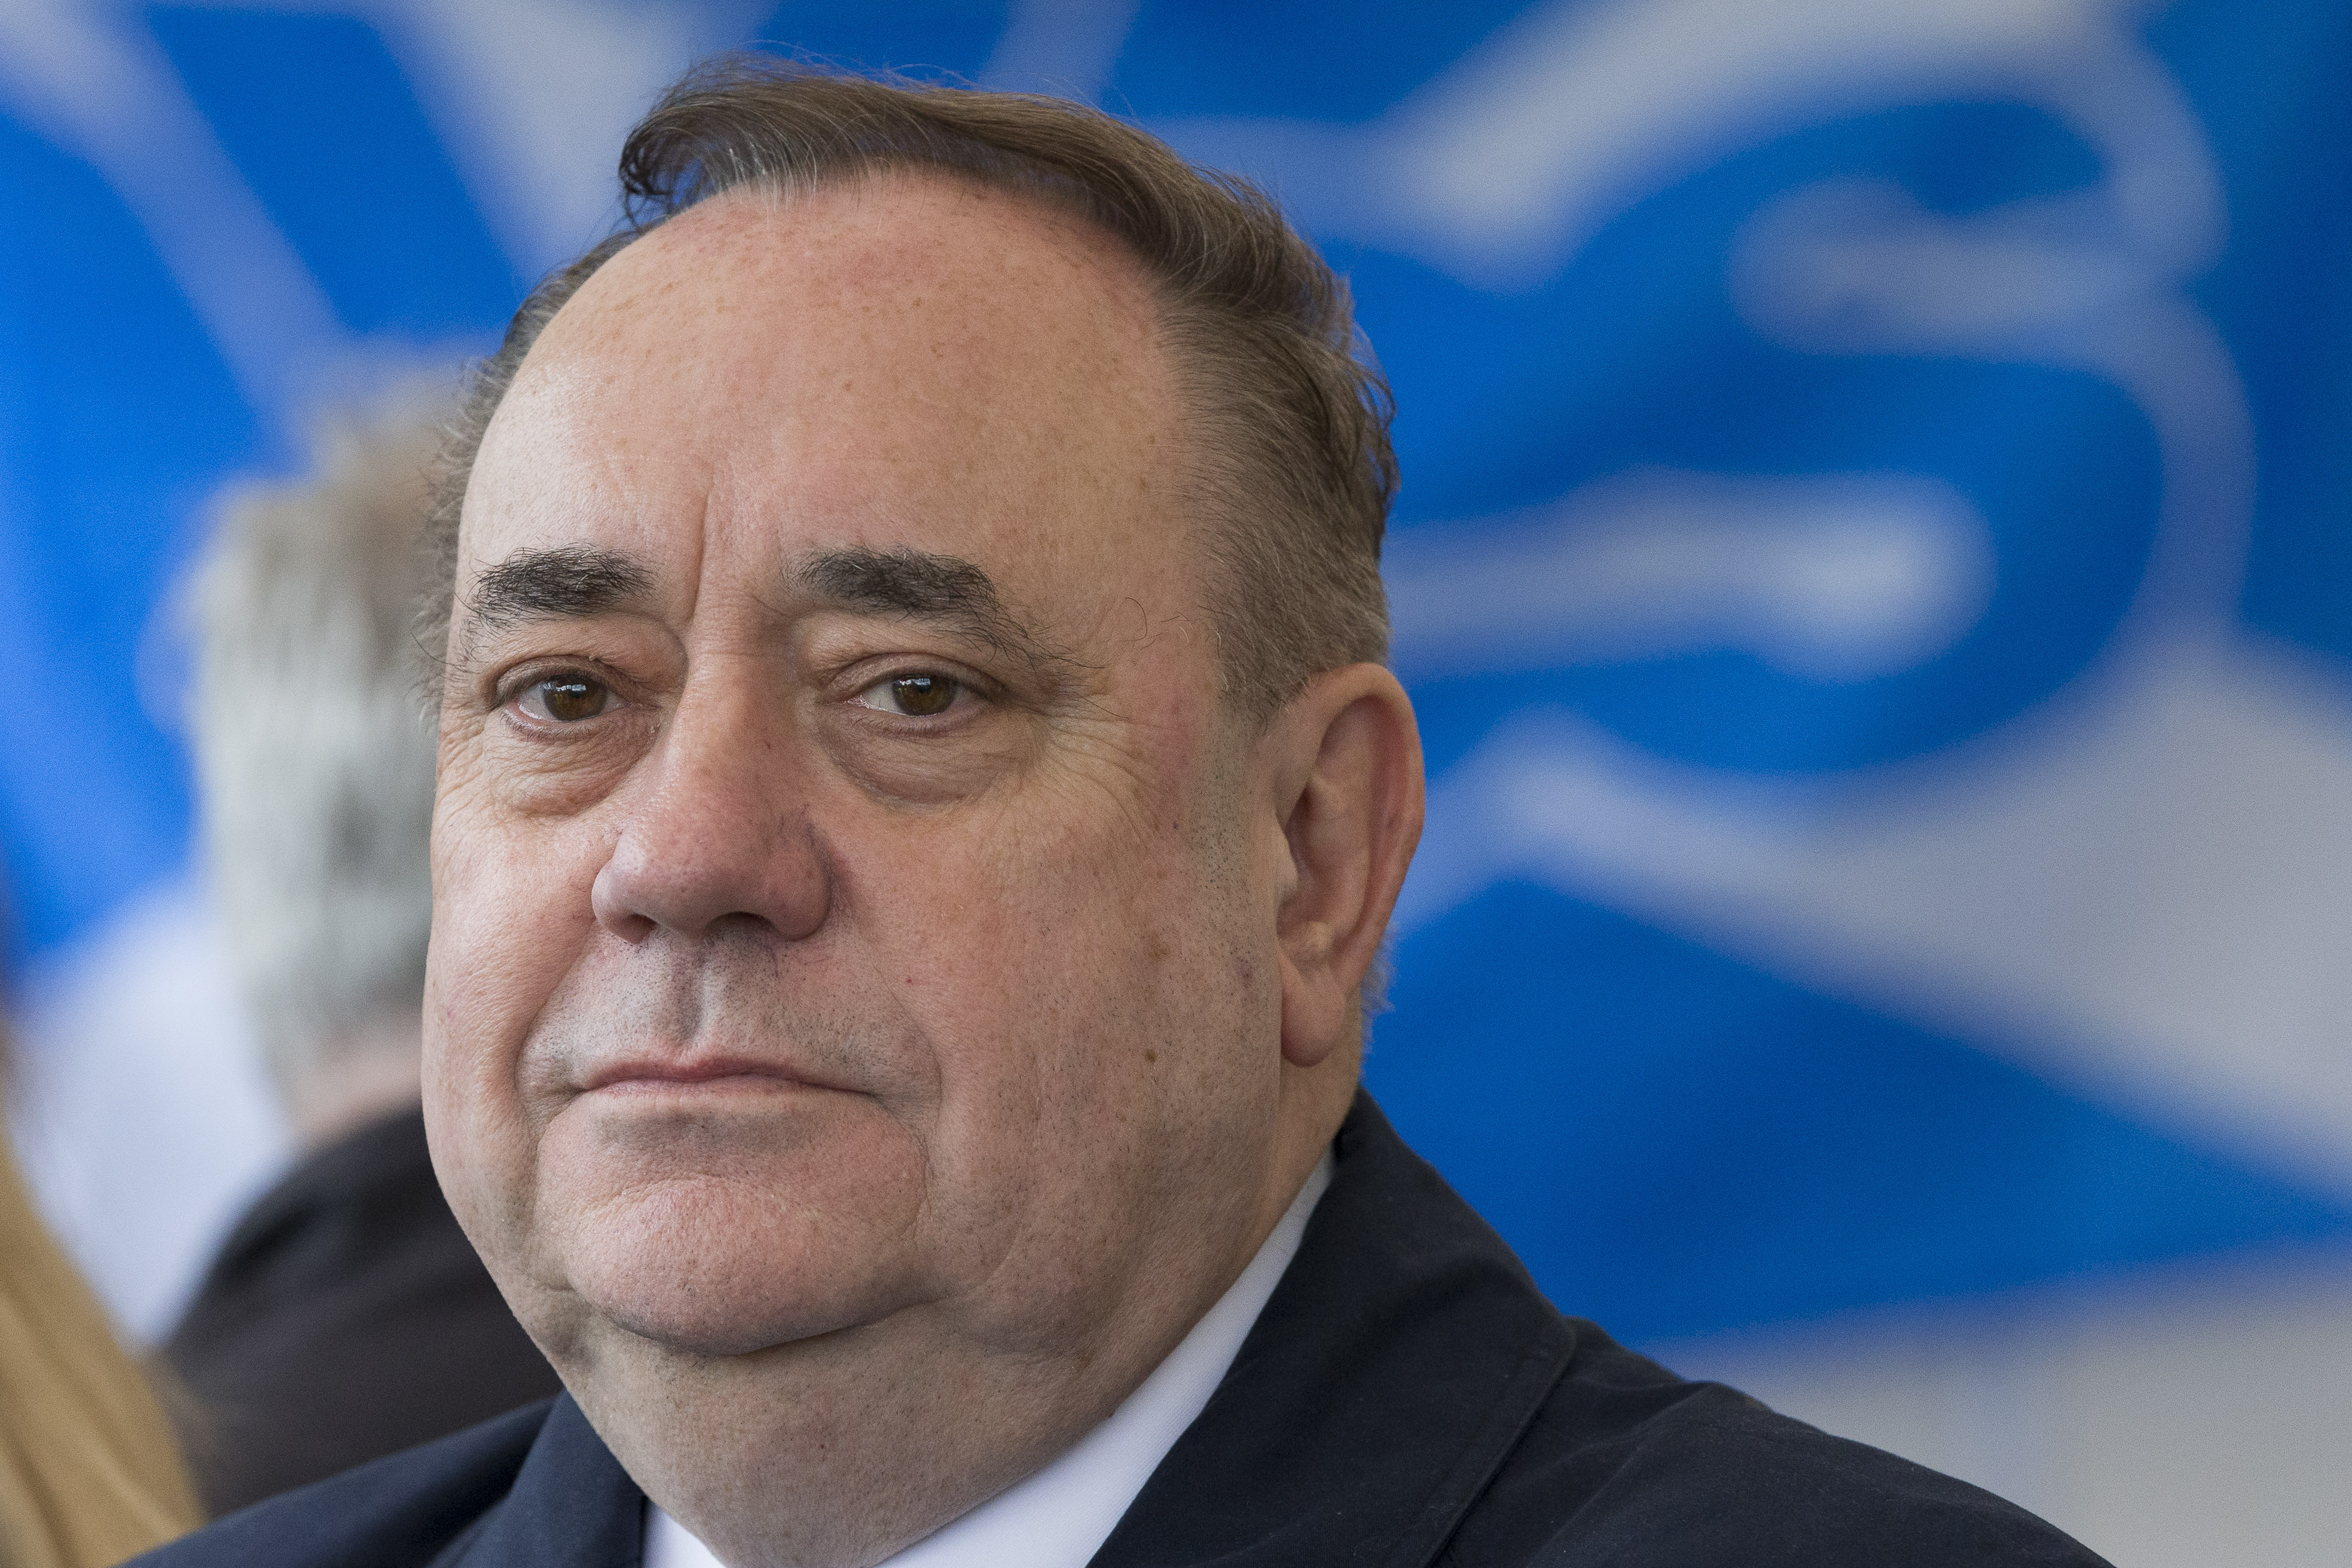 GLASGOW, SCOTLAND - MAY 06: Former Scottish First Minister and Alba Party leader Alex Salmond 